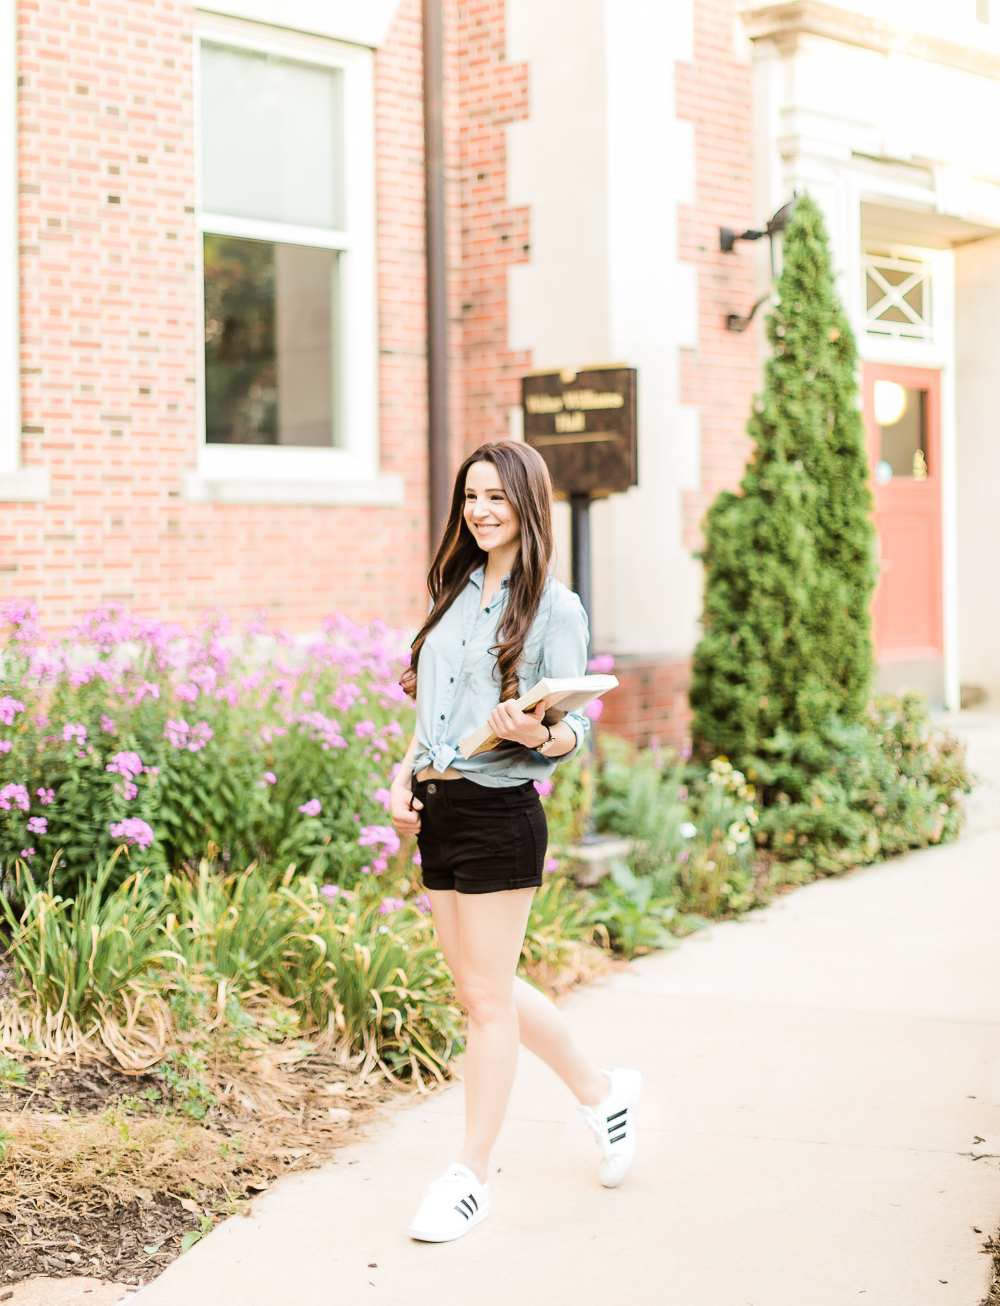  3 cute outfit ideas for school from Kohl's, Back to School Lookbook: Fall Style Picks from Kohl's by affordable fashion blogger Stephanie Ziajka from Diary of a Debutante, 3 casual college outfits from Kohl's, cute college clothes, teenage outfit ideas for school